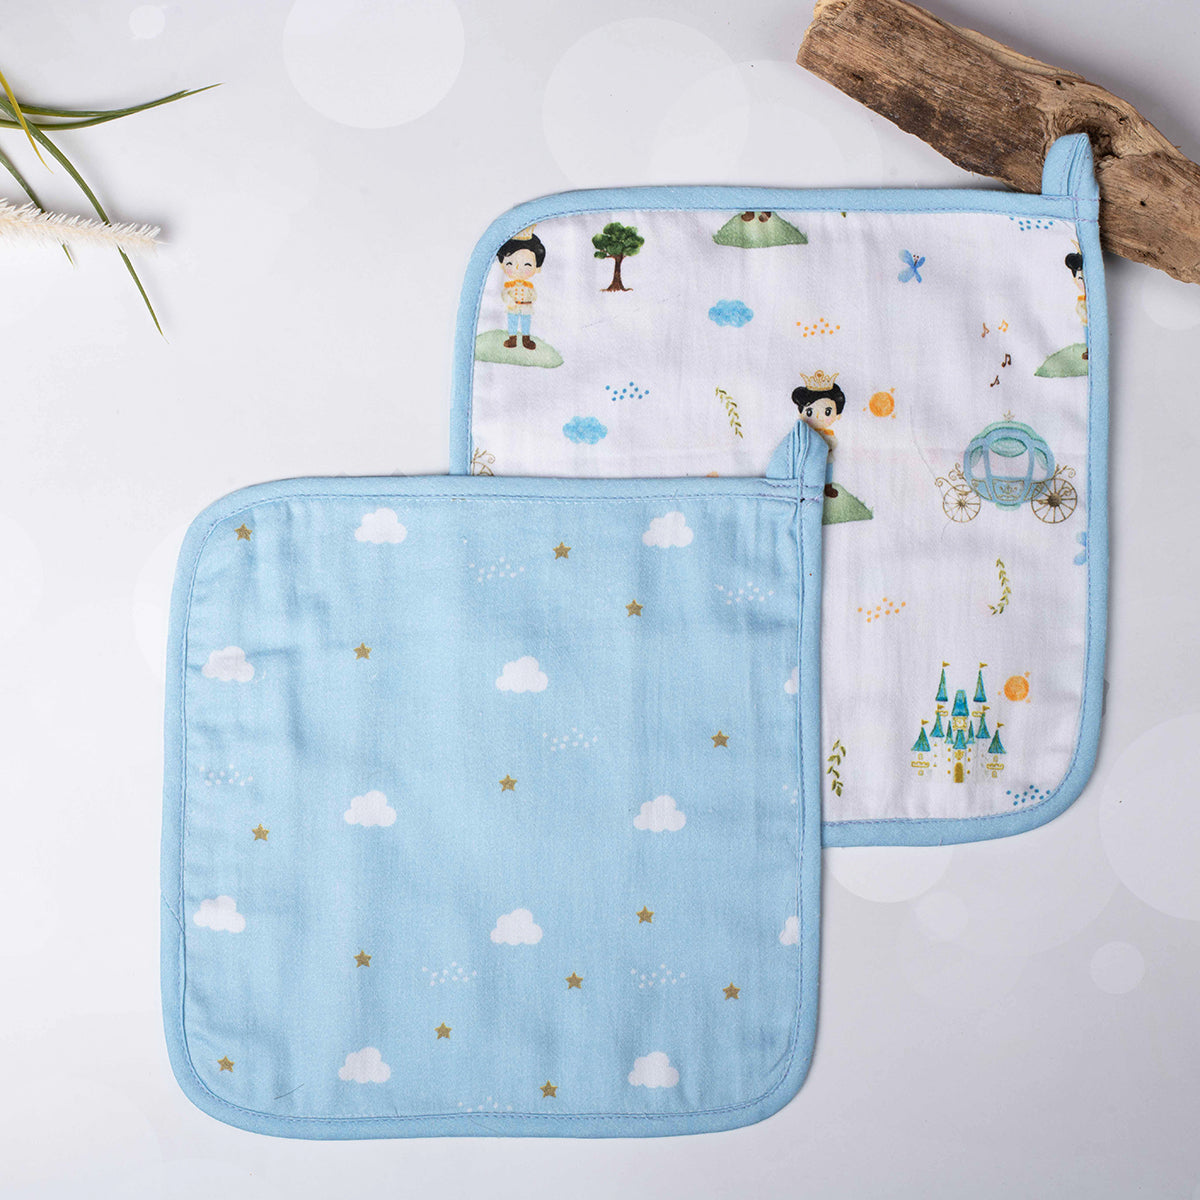 Tiny Snooze Organic Washcloths (Set of 2)-The Little Prince